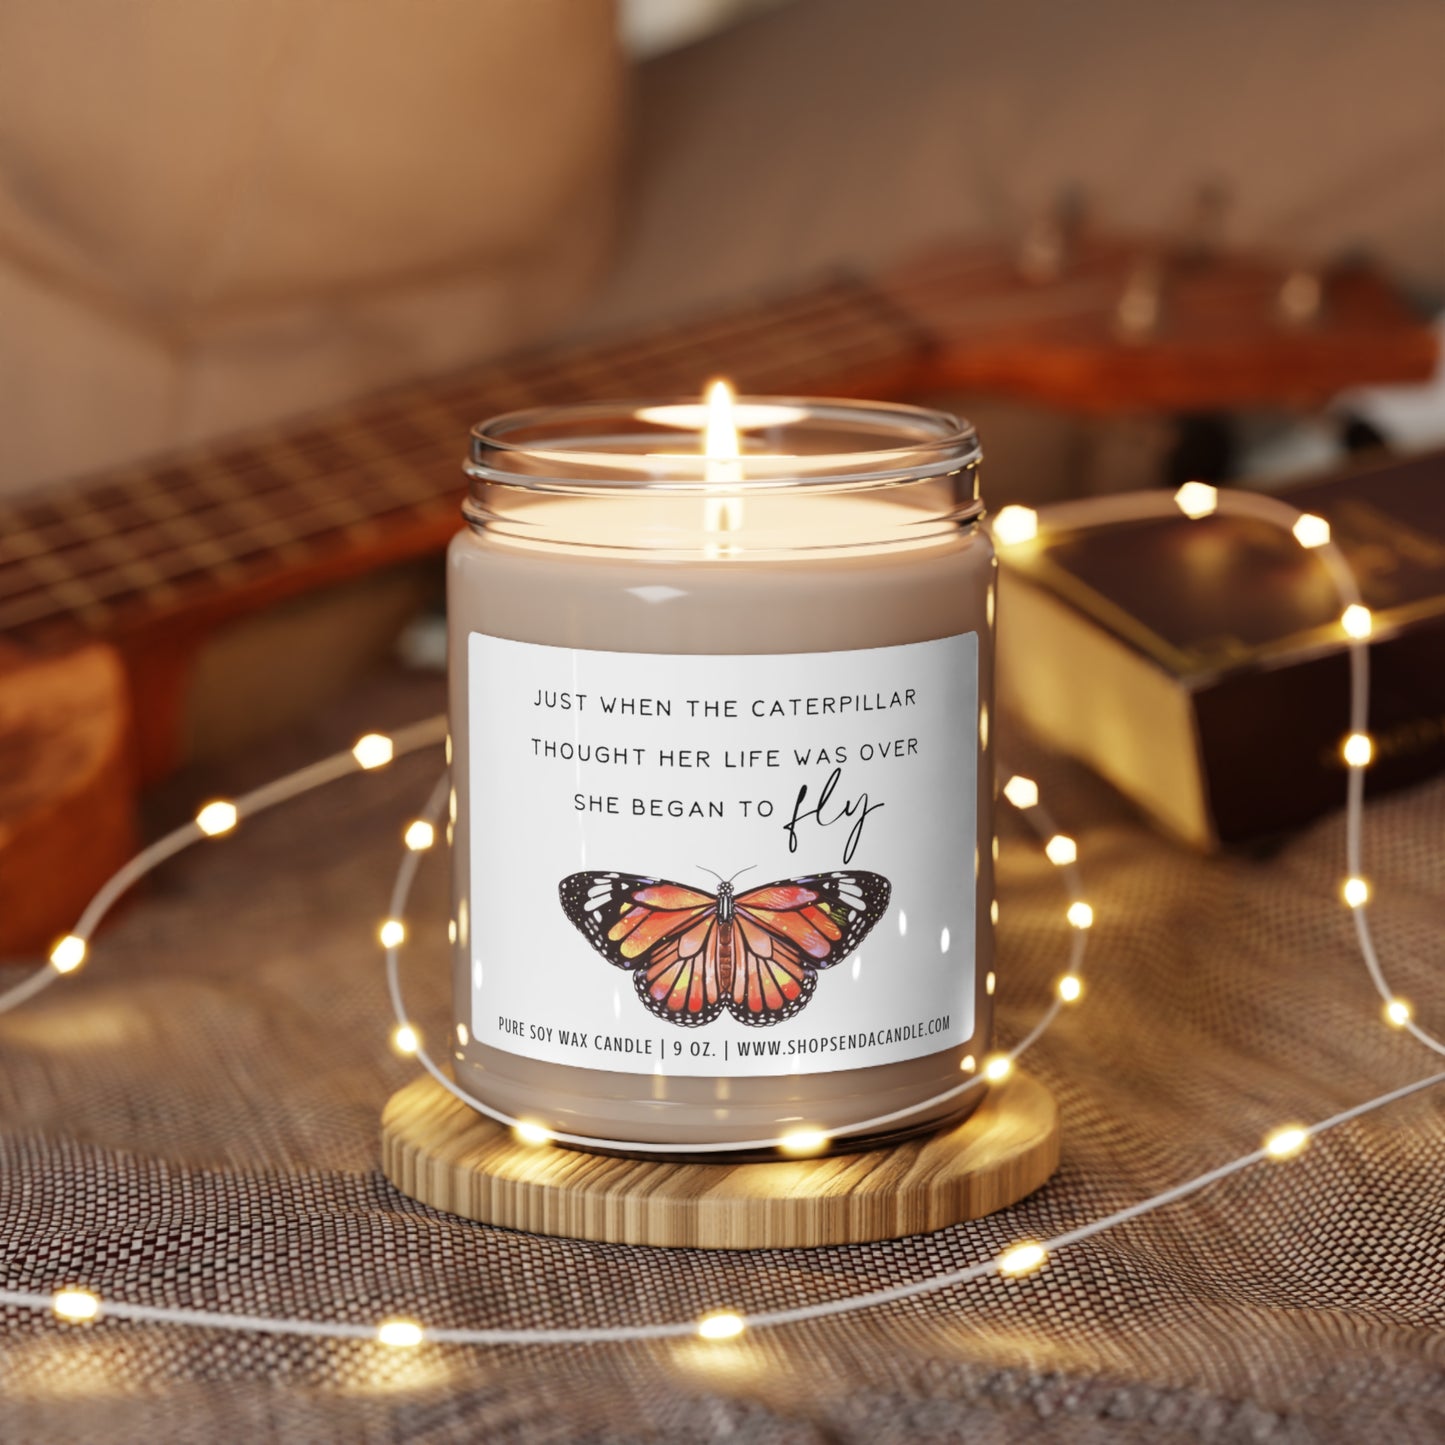 Encouragement Gifts For Her